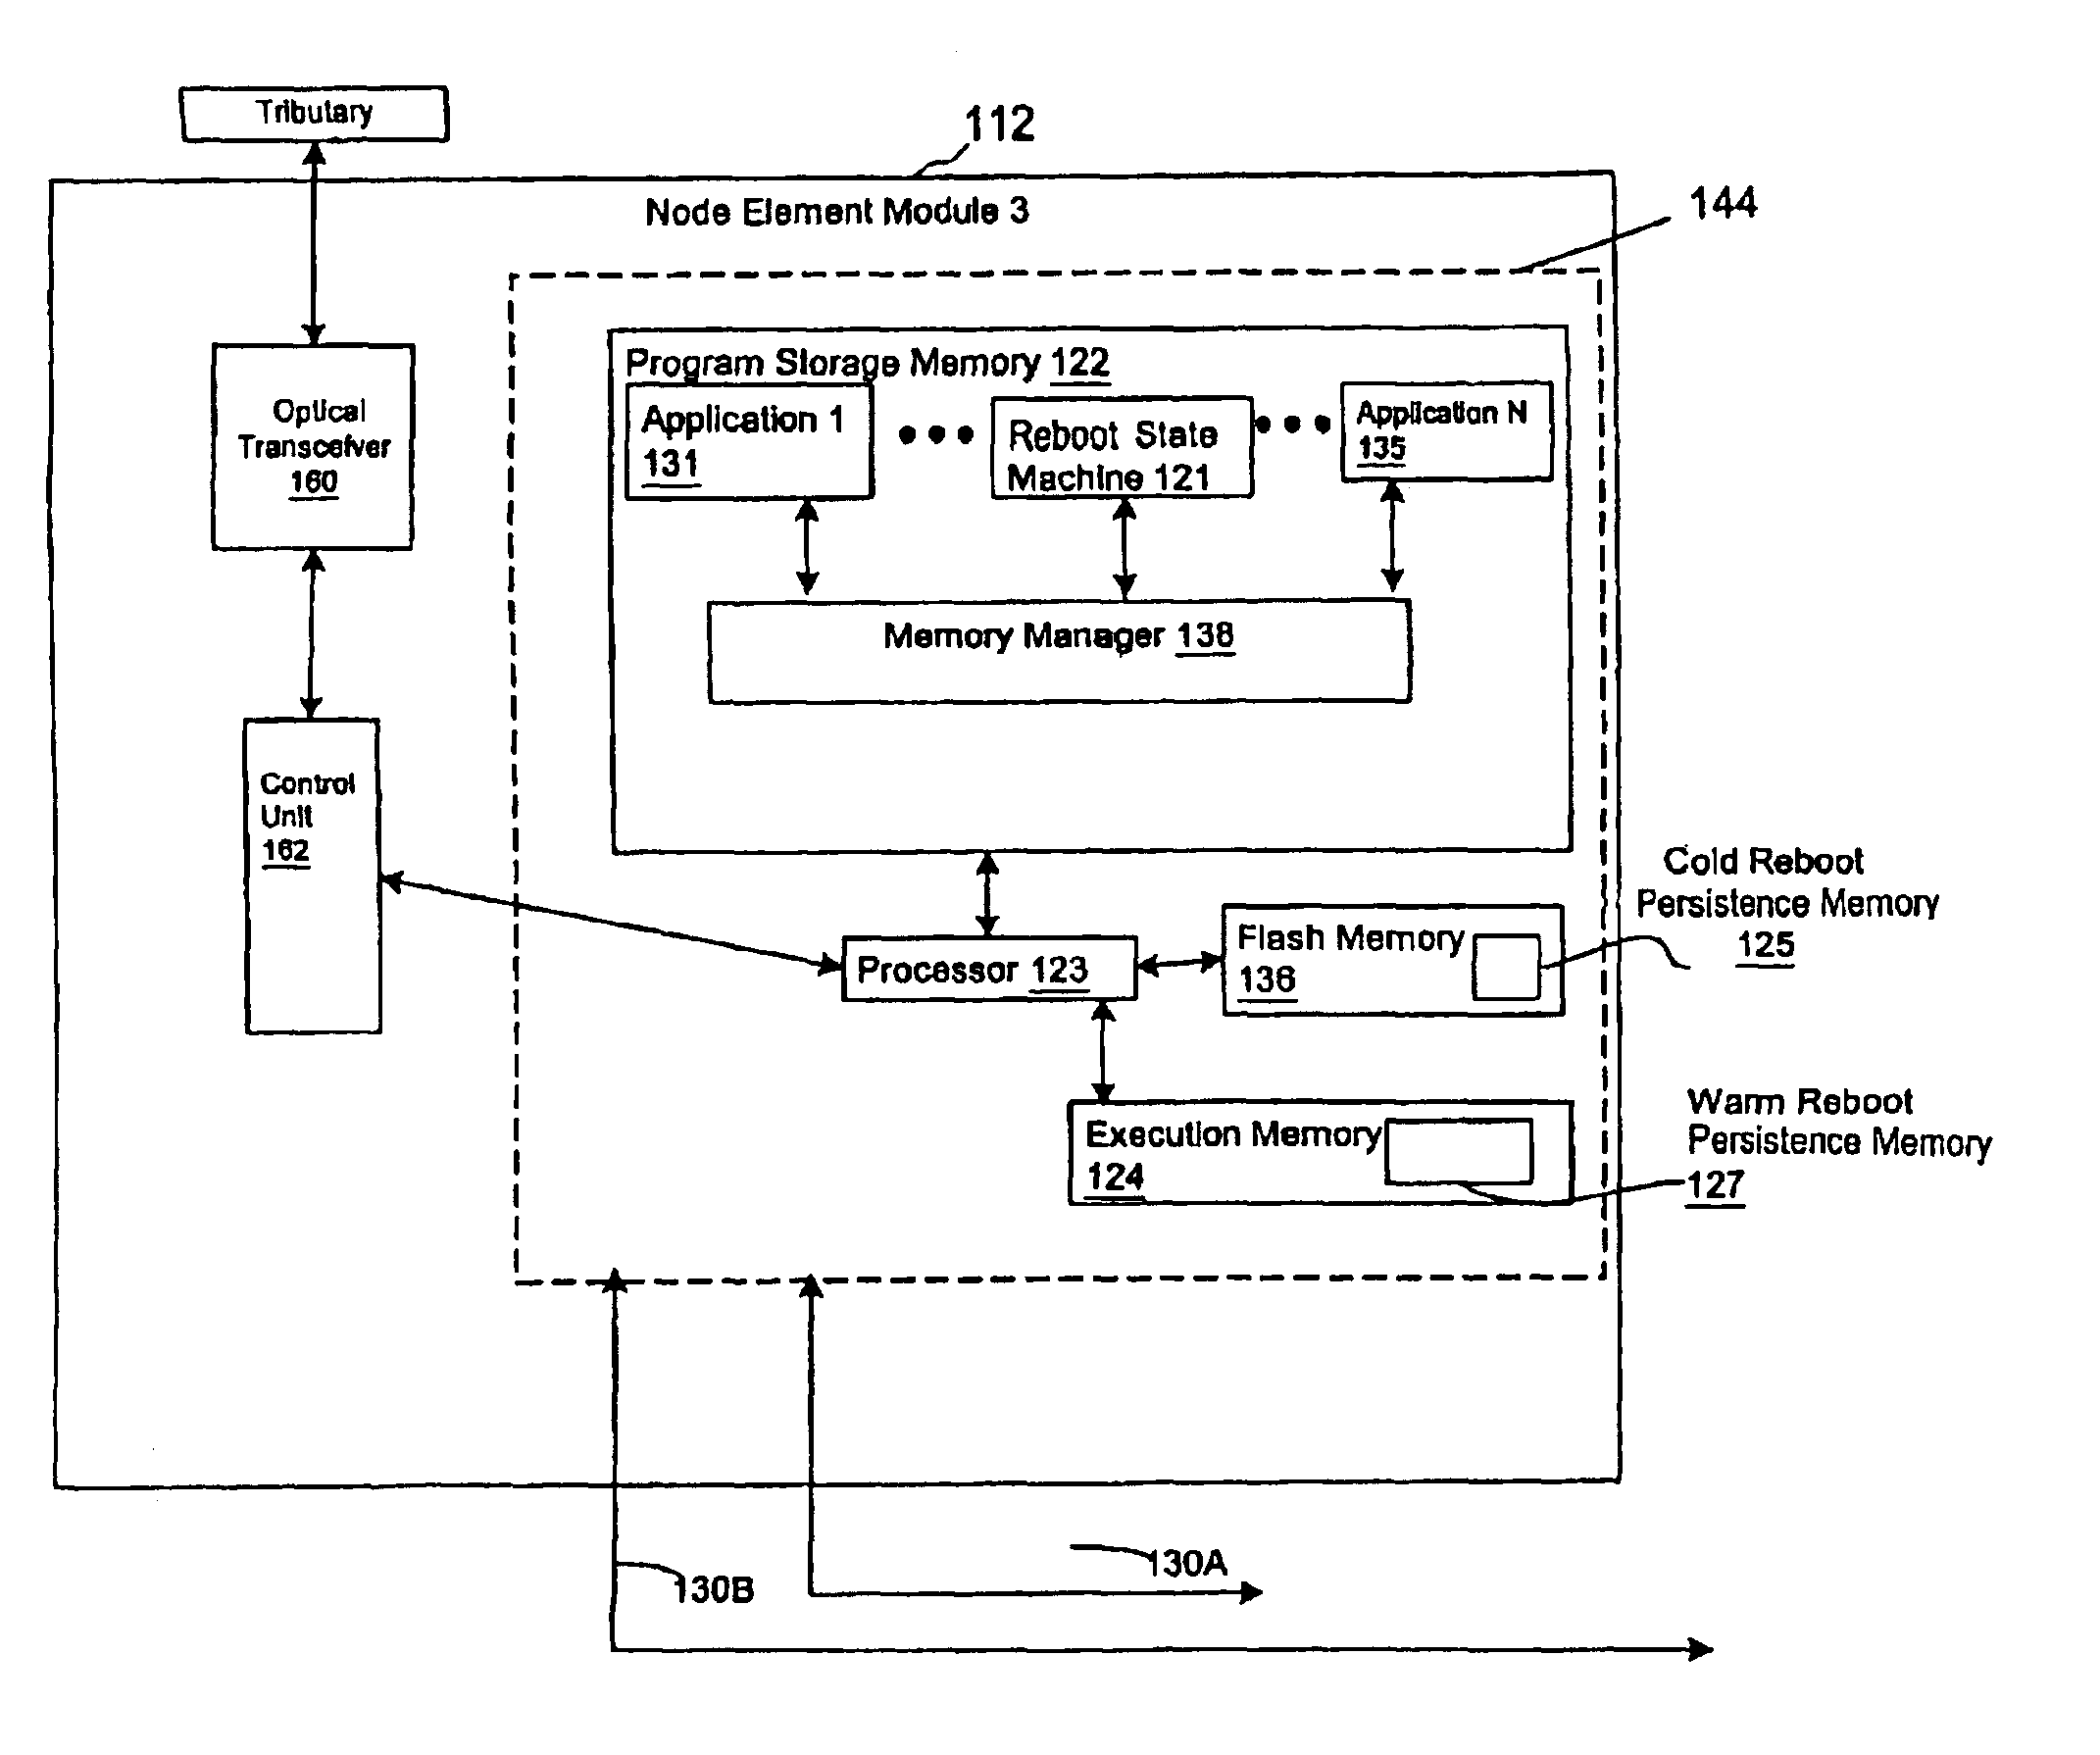 System and method of memory management for providing data storage across a reboot